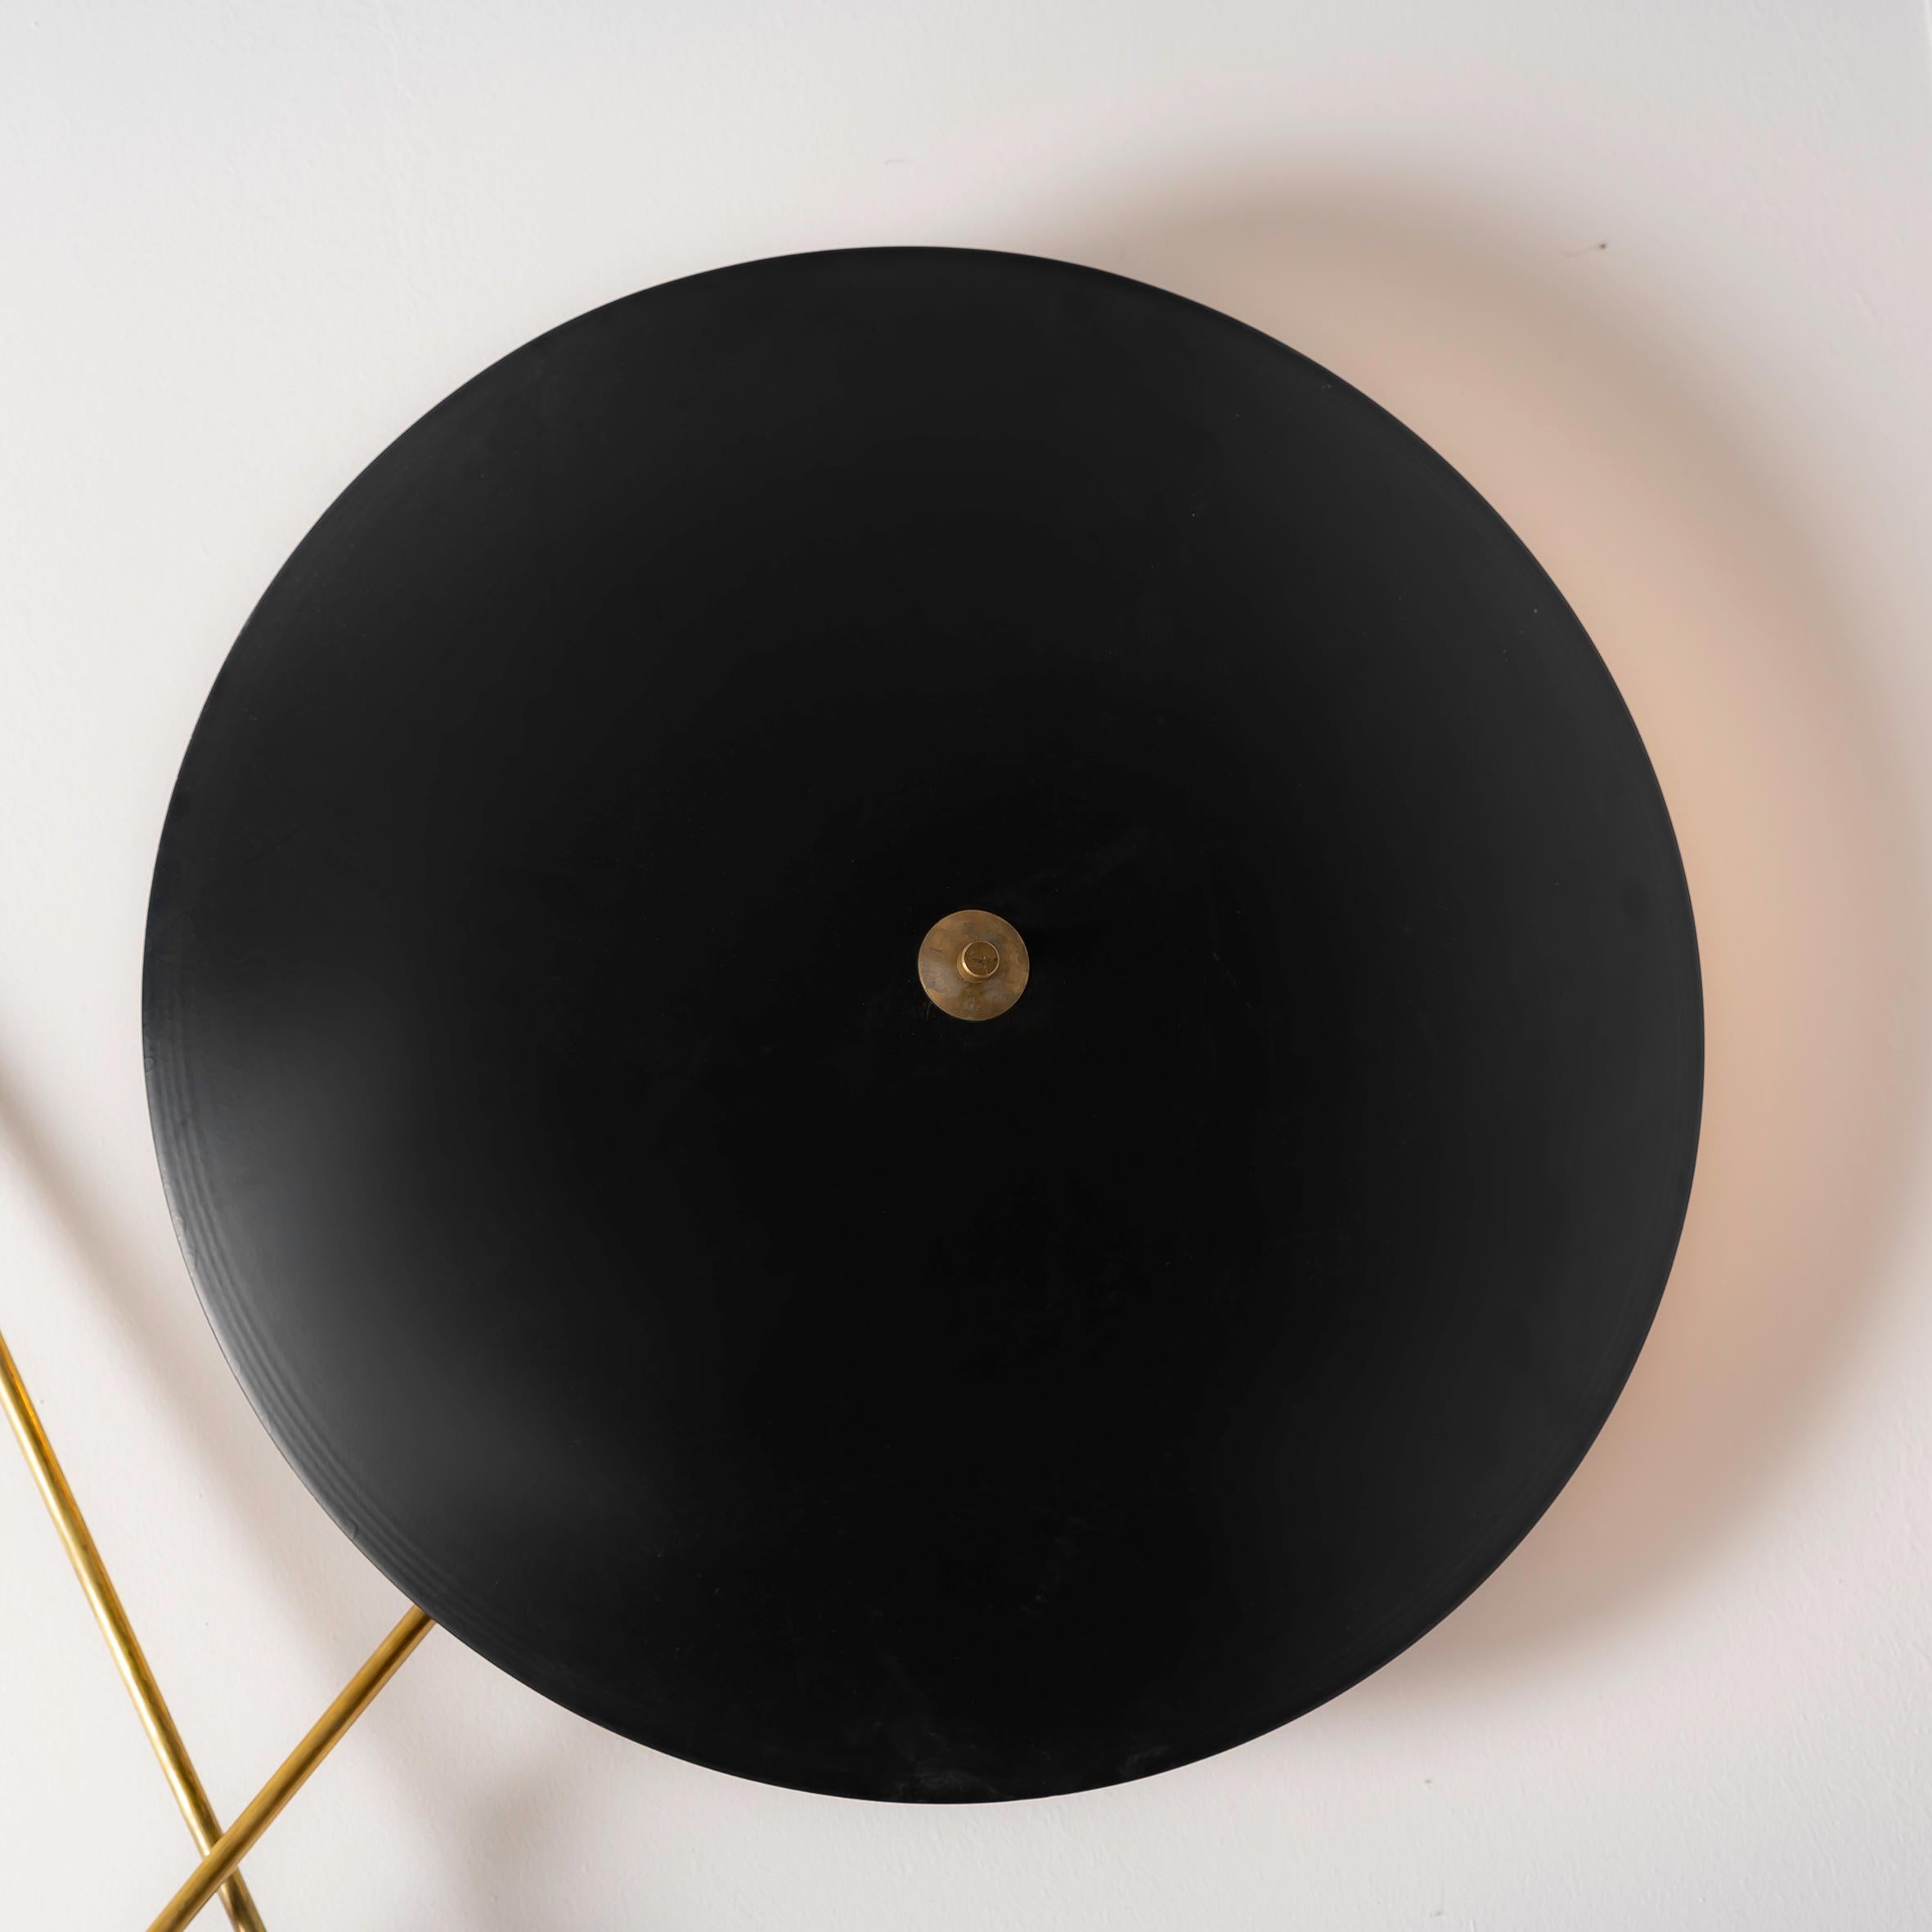 Purchasing this Vintage Wall Light consisting of two reflectors extending through the wall by Bruno Gatta for Stilnovo from the 1950s offers a unique opportunity to own a piece of design history that seamlessly blends functionality with aesthetic